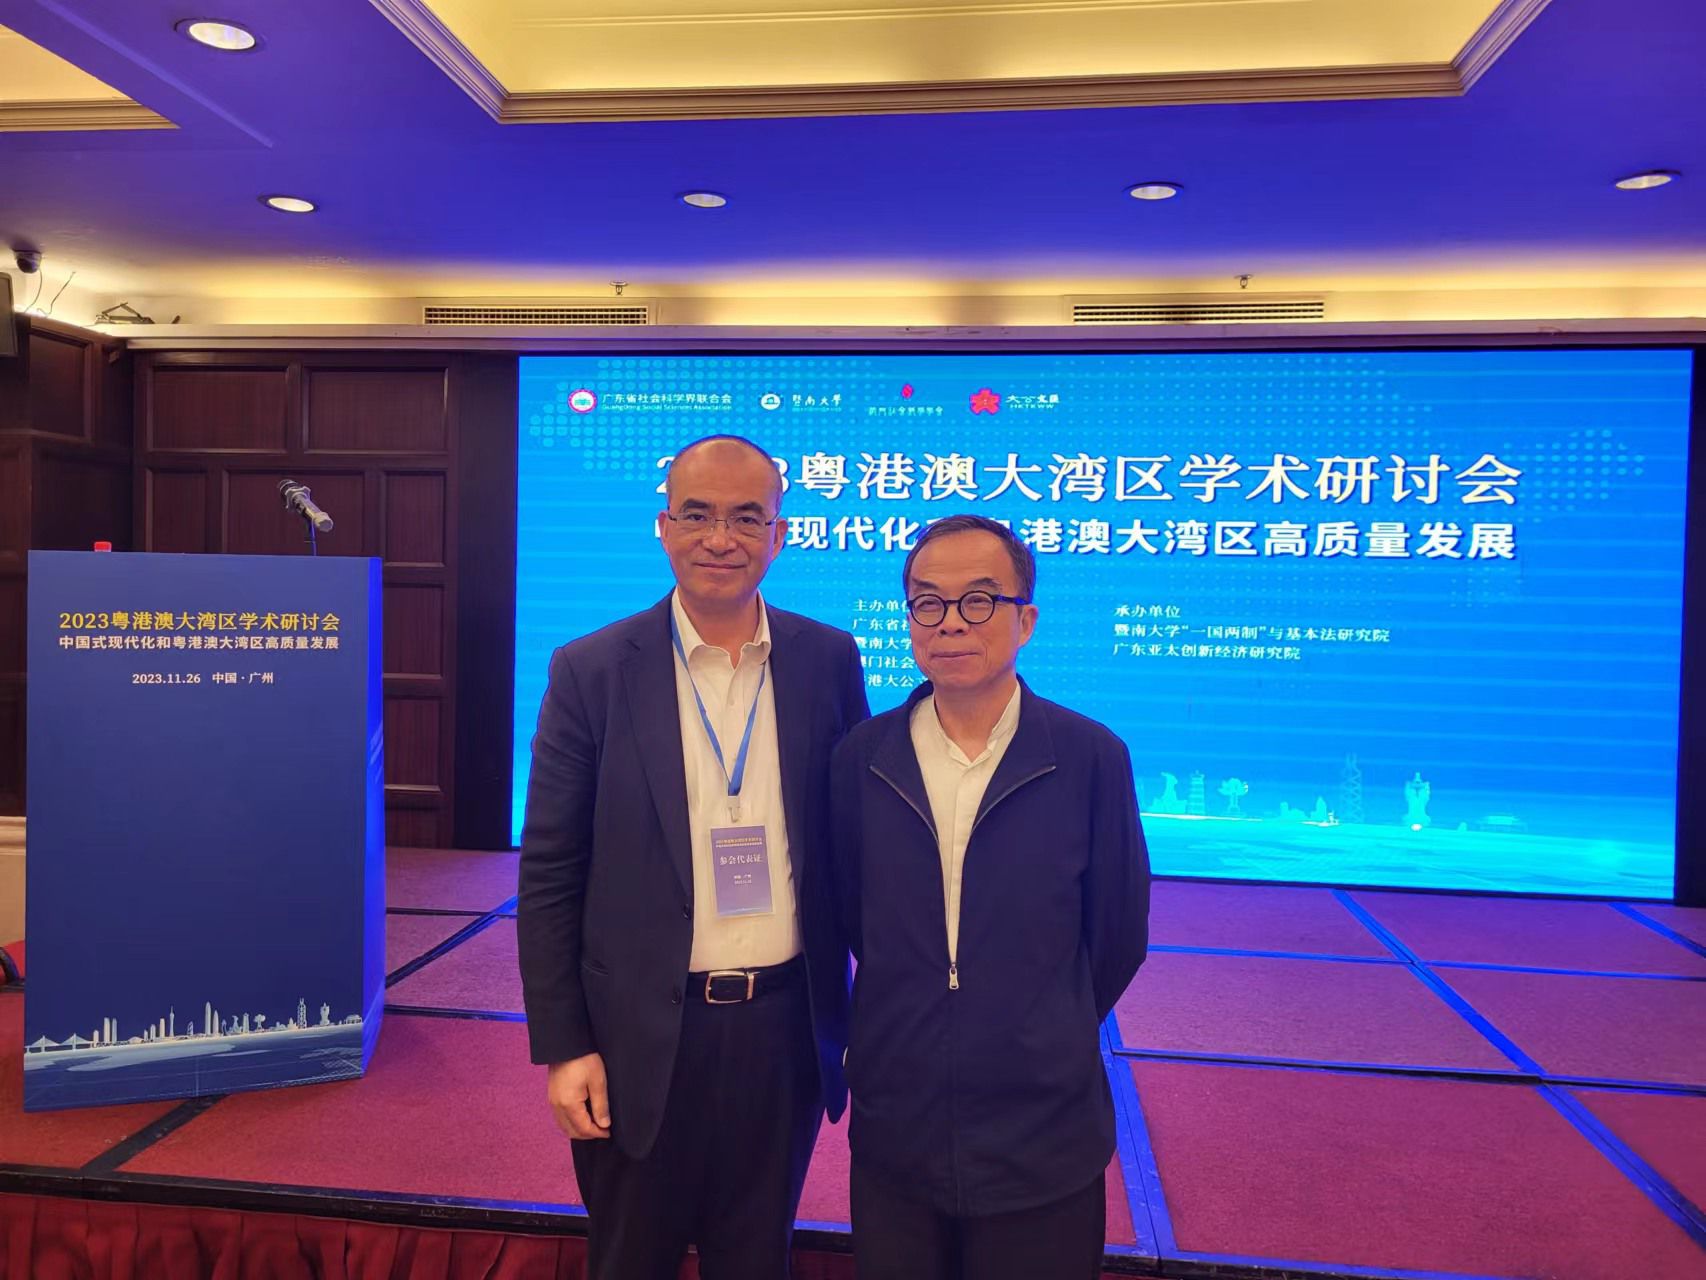 Dr Wang Chunxin, Deputy Head of the CEPU, attended the Guangdong-Hong Kong-Macao Greater Bay Area Academic Conference in Guangzhou to discuss how the high-quality development in the GBA could chart the way to Chinese-style modernisation.  The photo was taken with Professor Huang Ping, Member of the CEPU Expert Group.